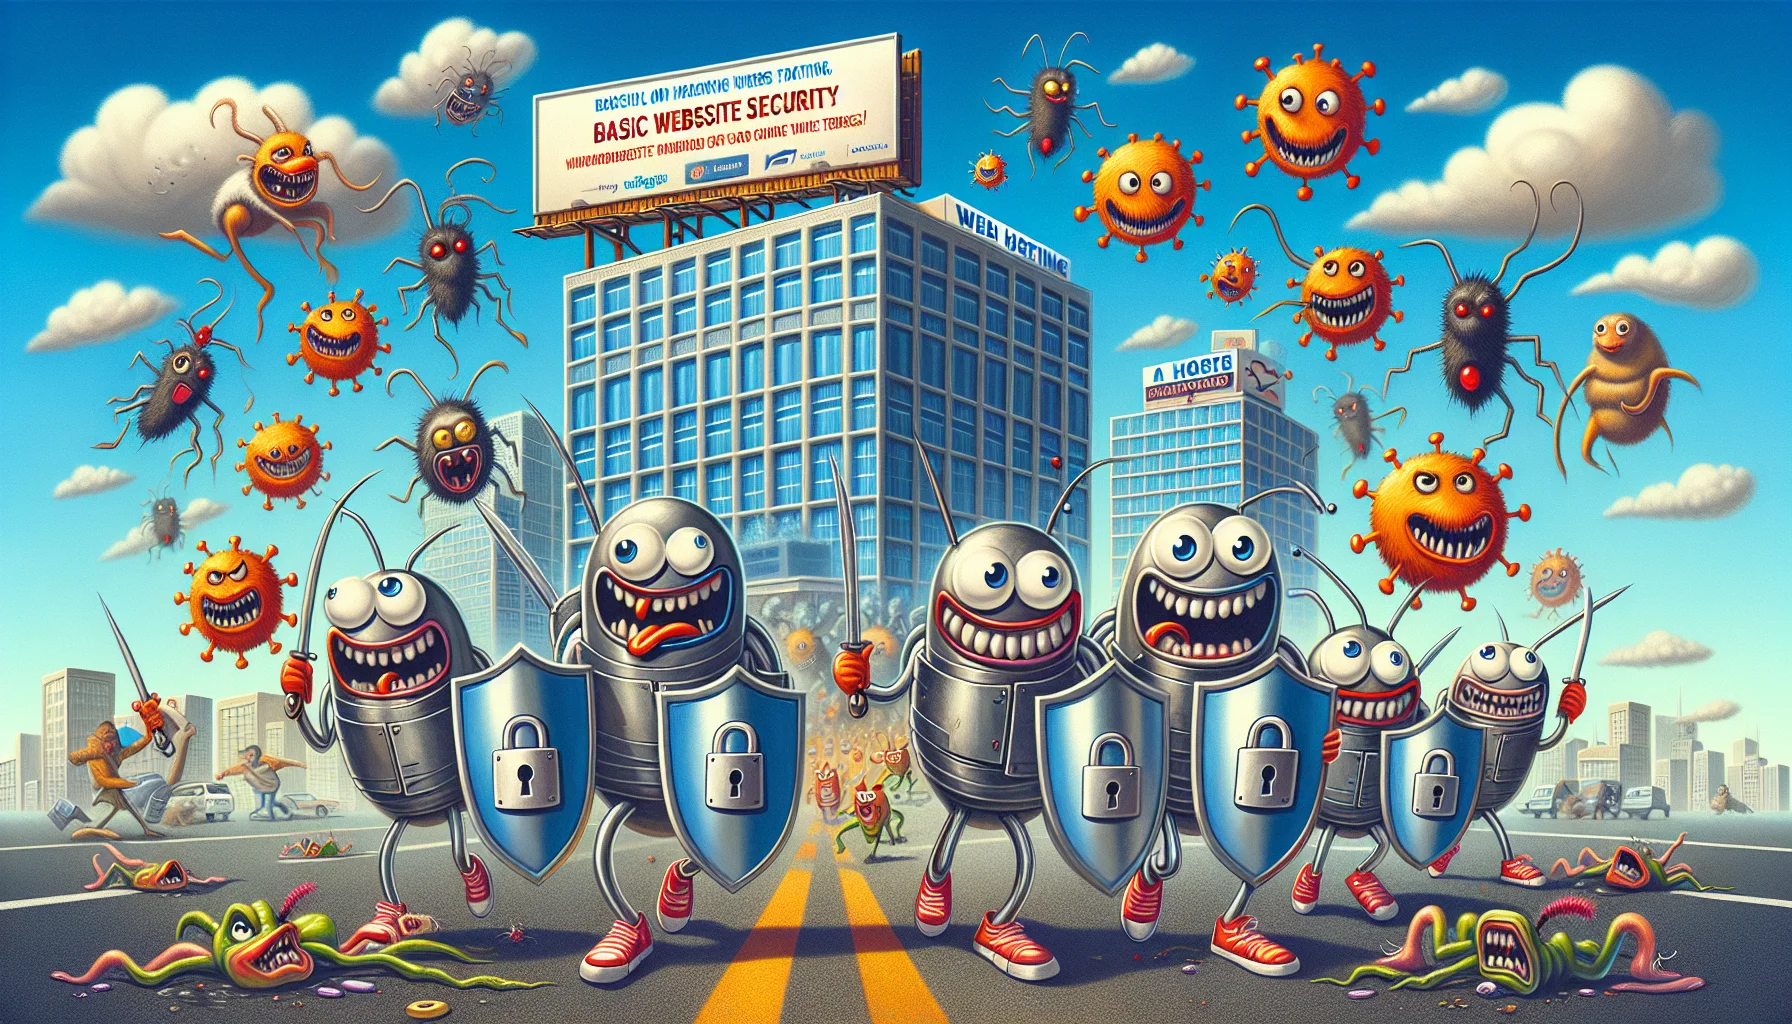 Create an image of a humorous, whimsical cyber landscape where anthropomorphized basic website security measures, symbolized as goofy cartoon characters, courageously fend off digital threats. In the background, show the building of a web hosting service. Make the image realistic, but retain a sense of fun and playfulness. The characters should carry shields with locks on them, which represents the core idea of online security. Around them, include light-hearted depictions of harmful factors like viruses and malware portrayed as quirky, mischievous creatures. Also, have a billboard in the image, advertising the virtues of secured web hosting.